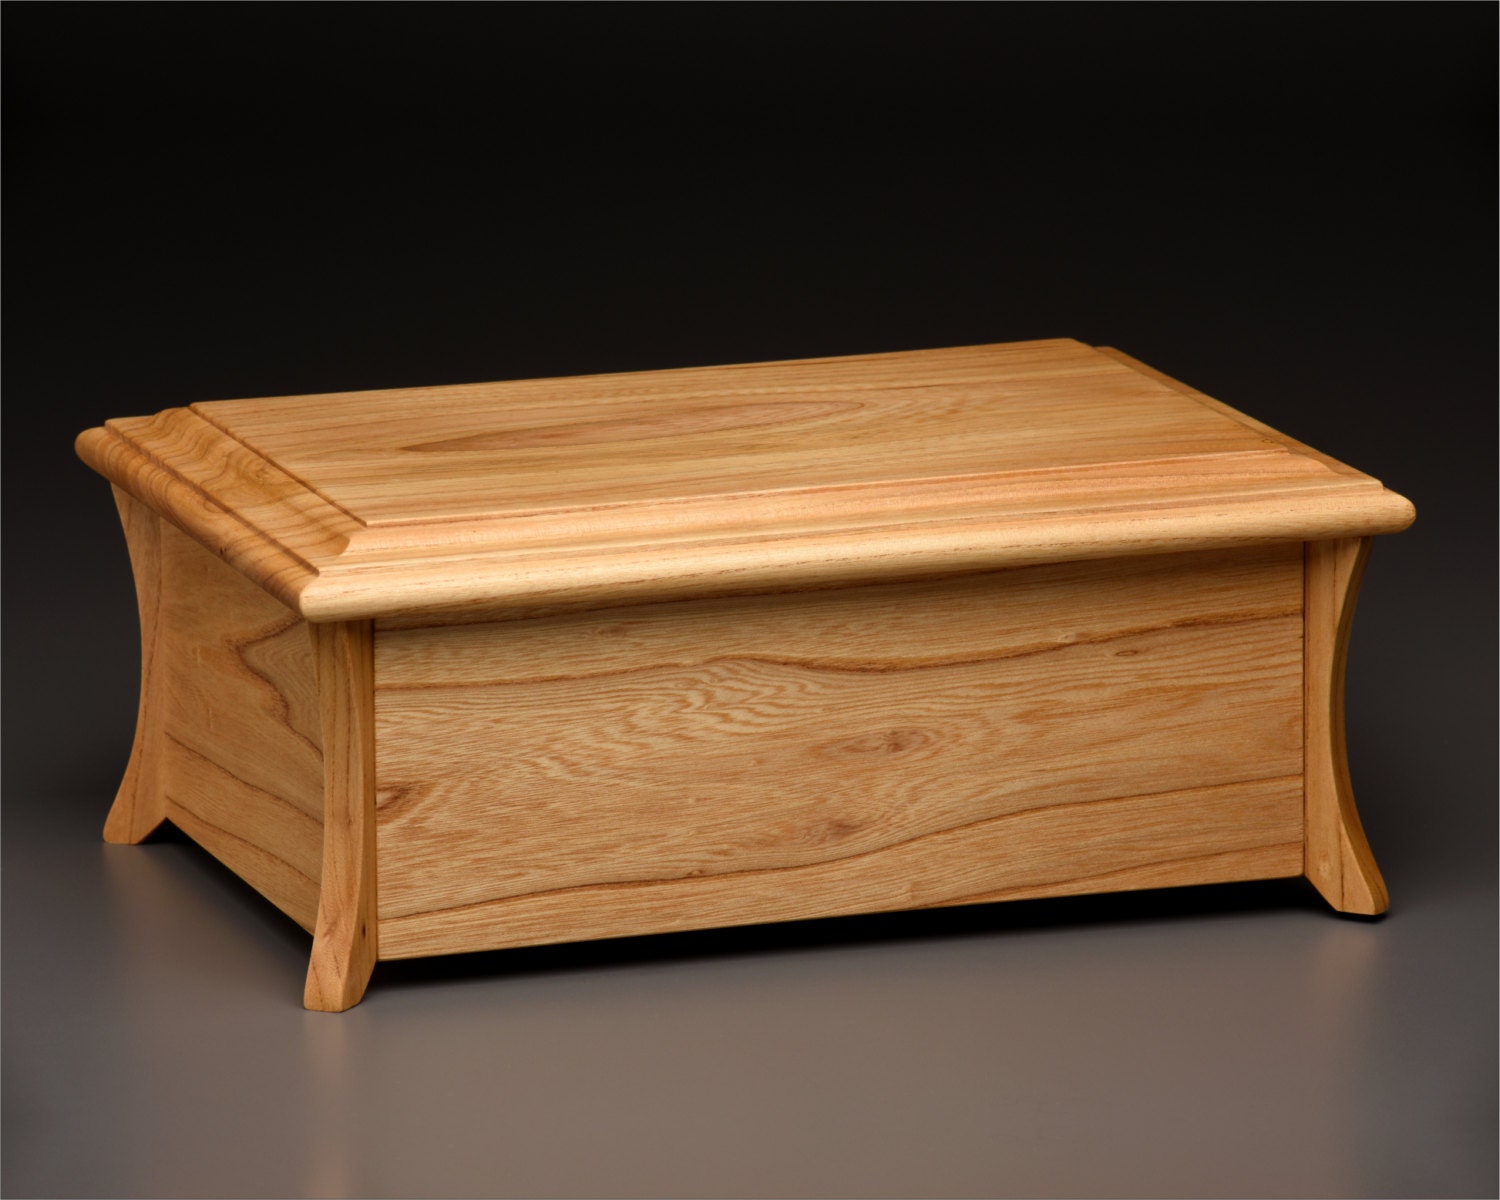 Corellian Elm Cremation Urn Adult human wood cremation and